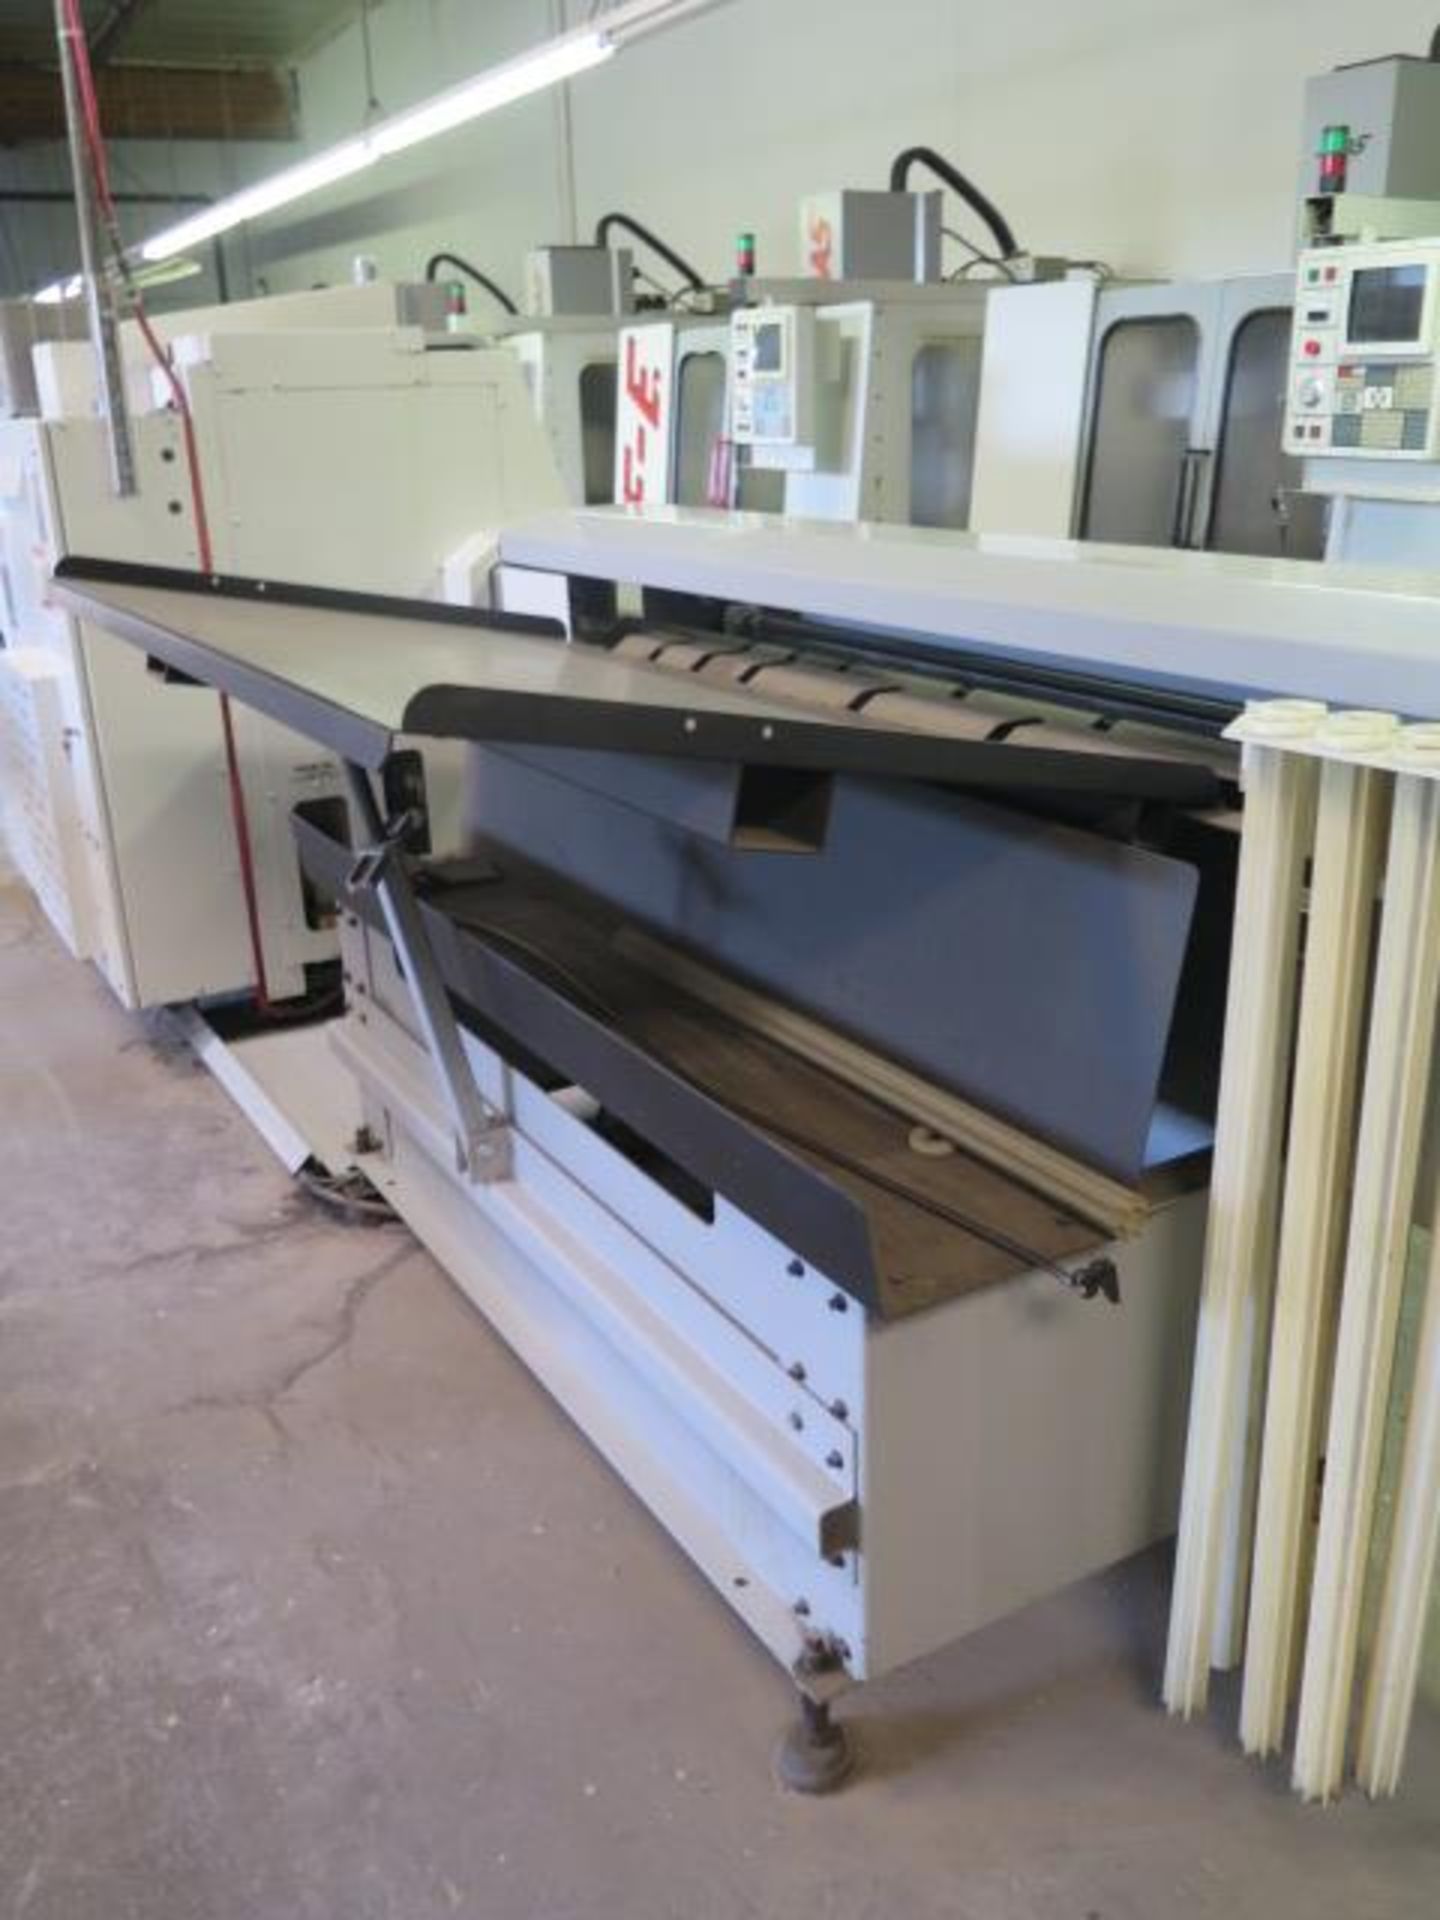 Haas Servobar 300 Automatic Bar Loader / Feeder s/n 92046 w/ Spindle Liner Set (SOLD AS-IS - NO WARR - Image 8 of 11